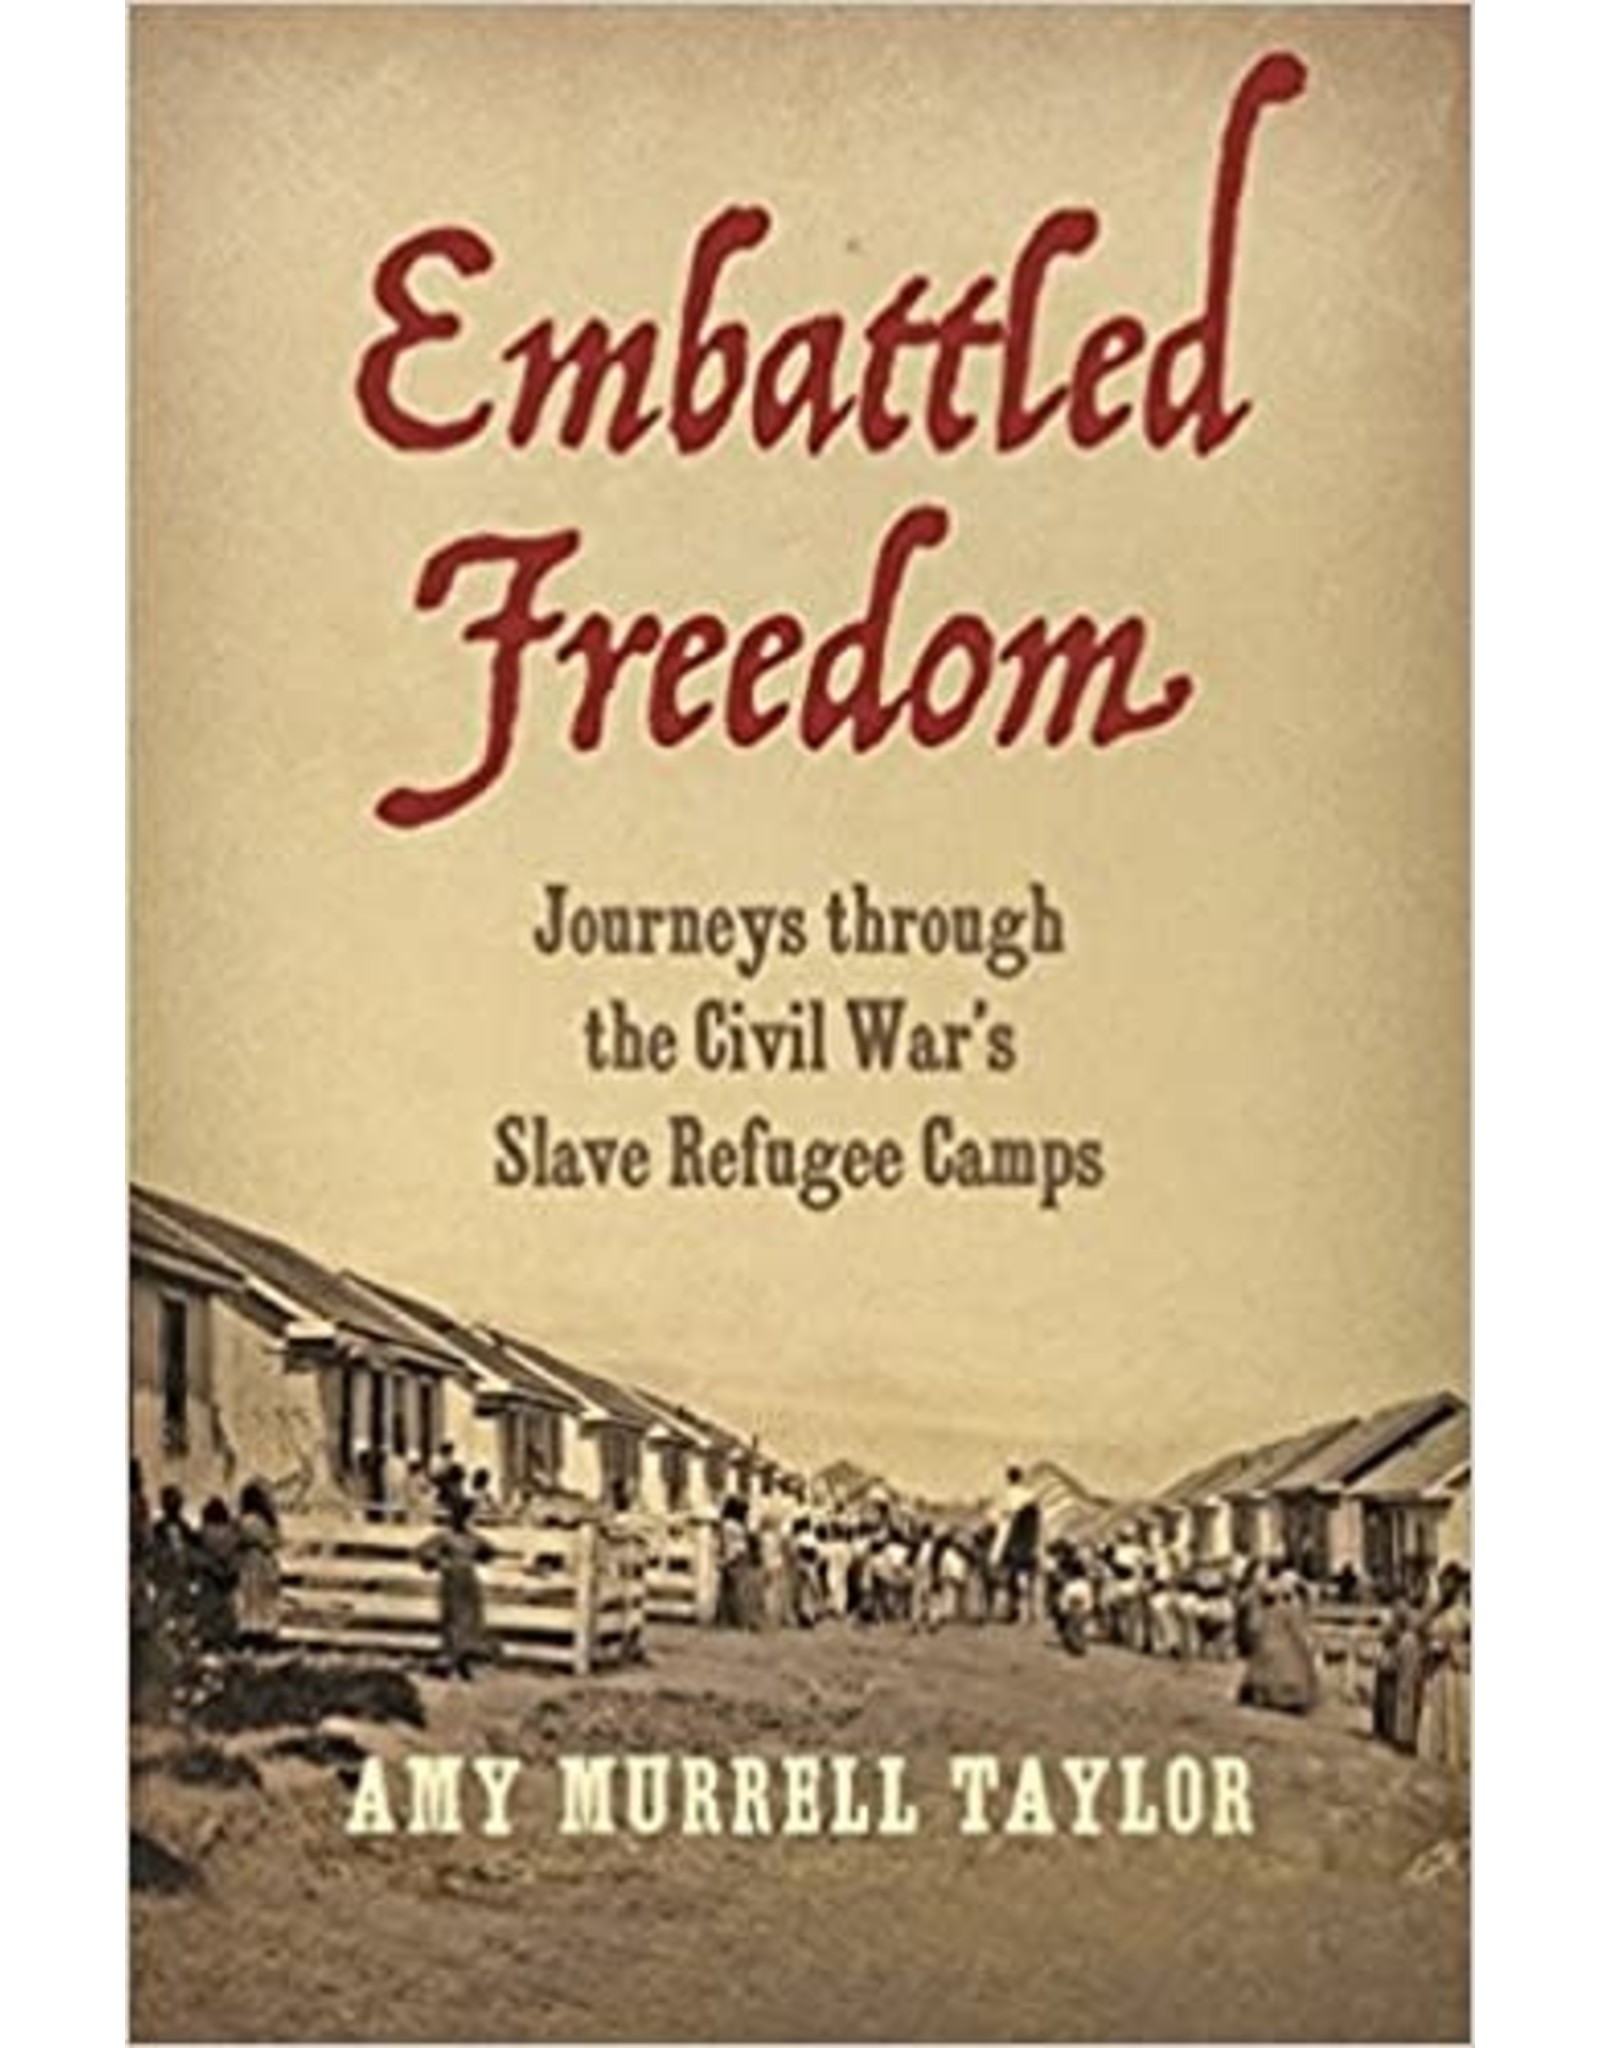 Non-Fiction: Civil War & Reconstruction Embattled Freedom